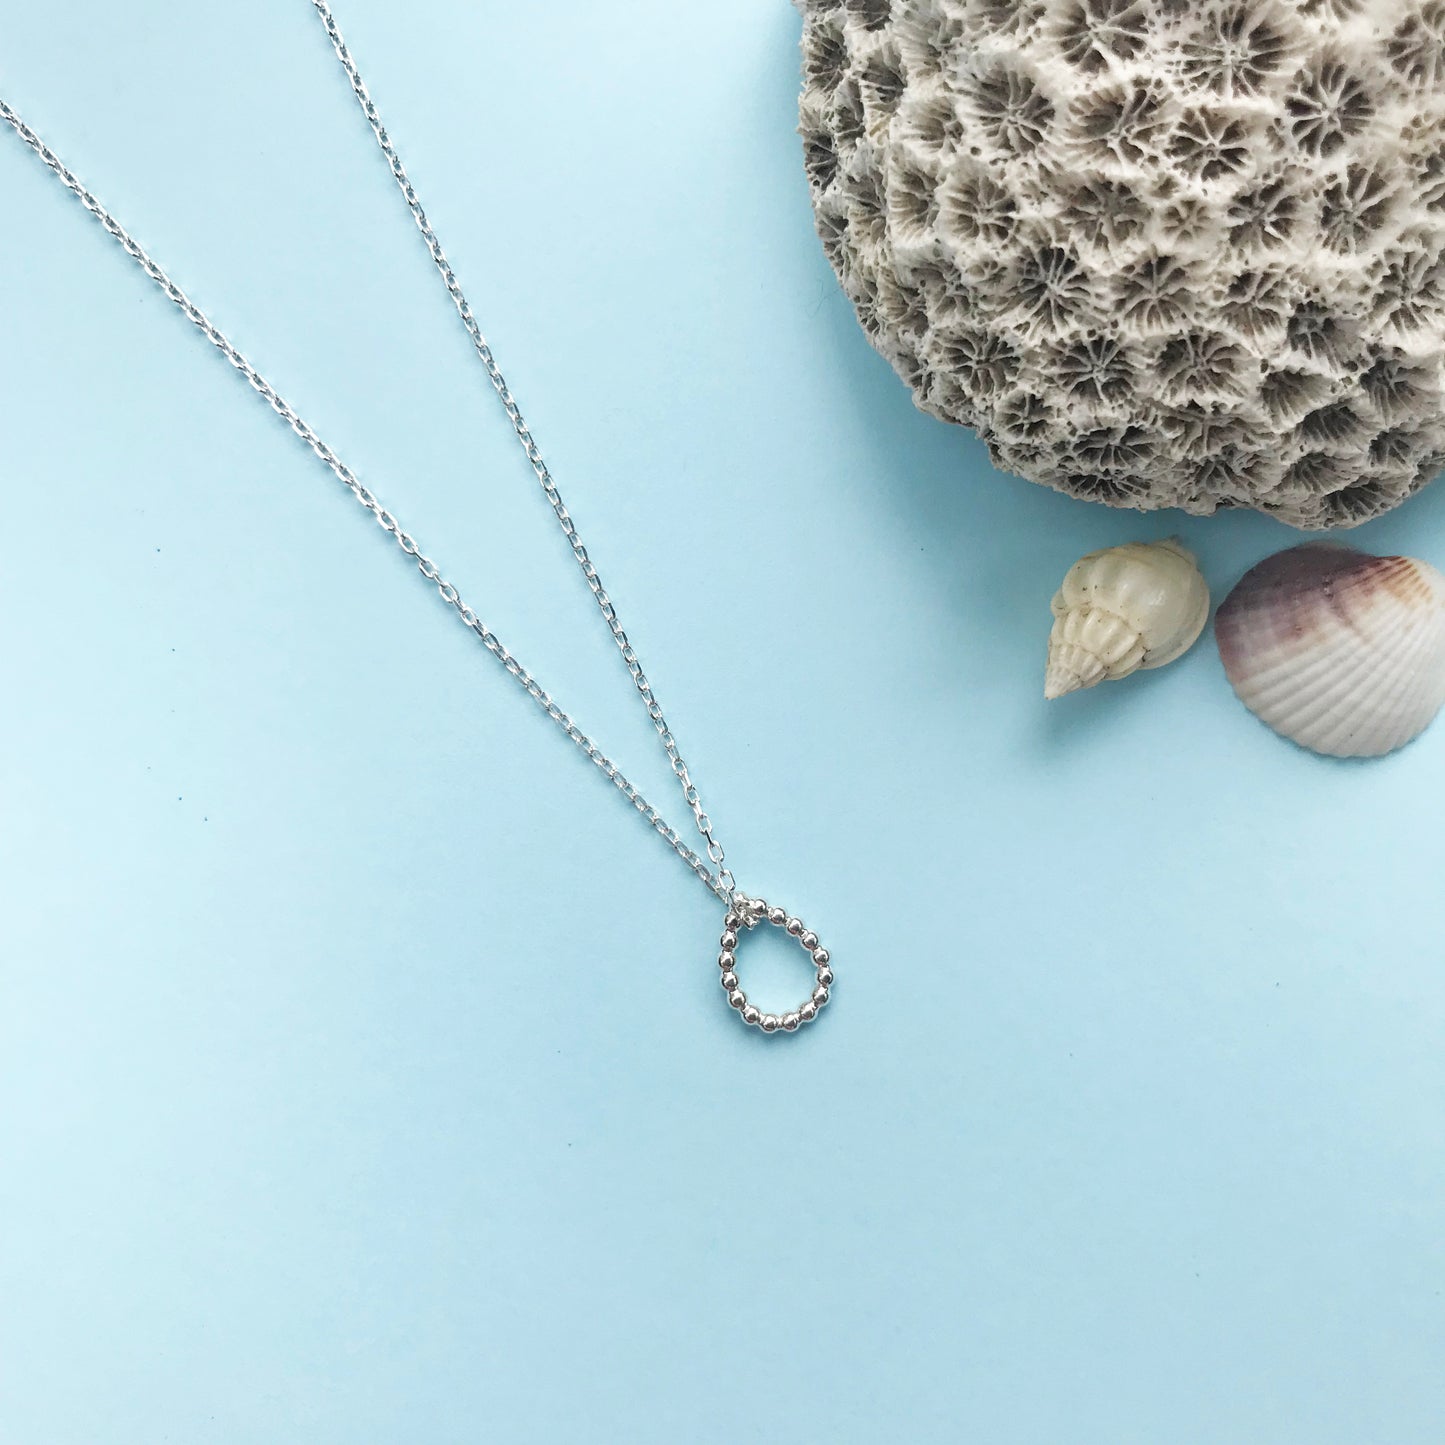 sterling silver dewdrop bobble pendant with polished finish, sterling silver dewdrop bobble pendant, silver necklace, dewdrop silver pendant necklace, silver bobble necklace